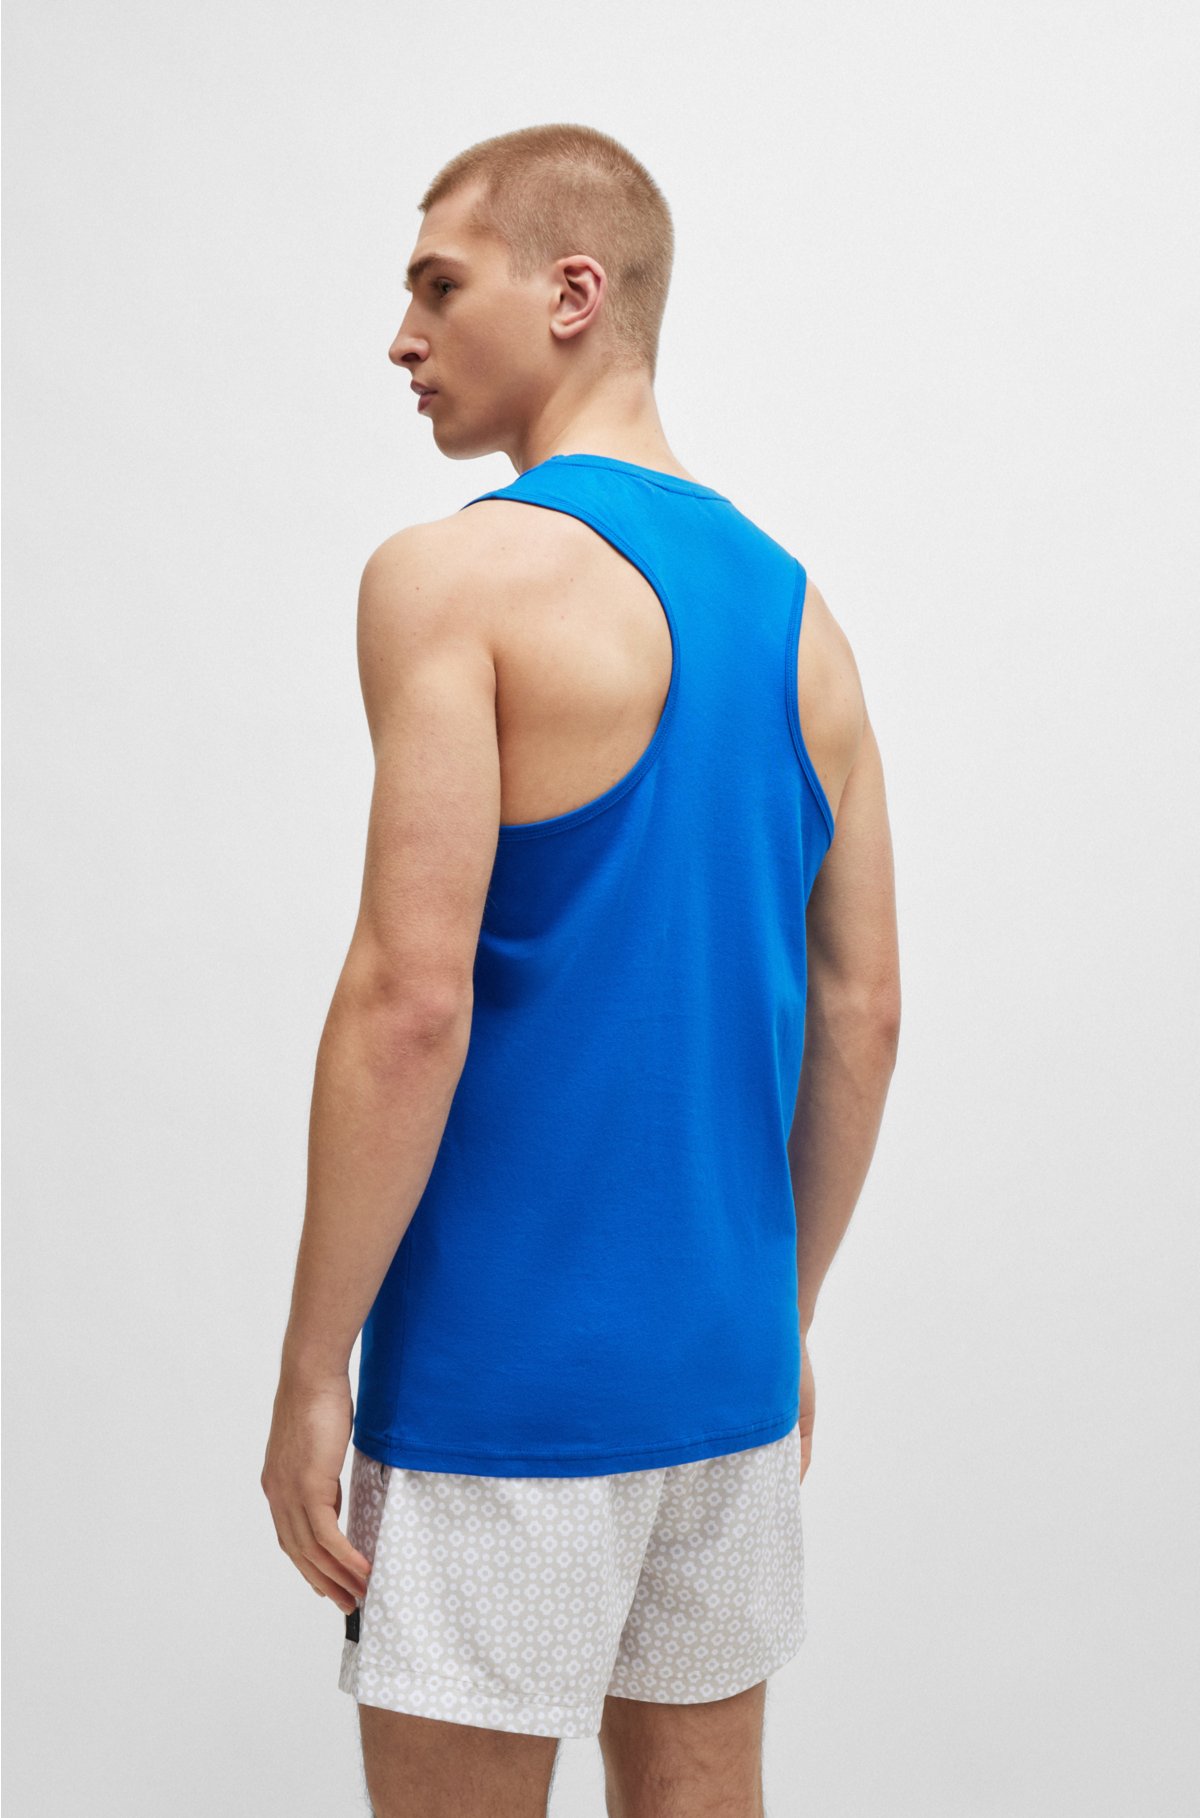 Tank top in cotton jersey with outline logo, Blue